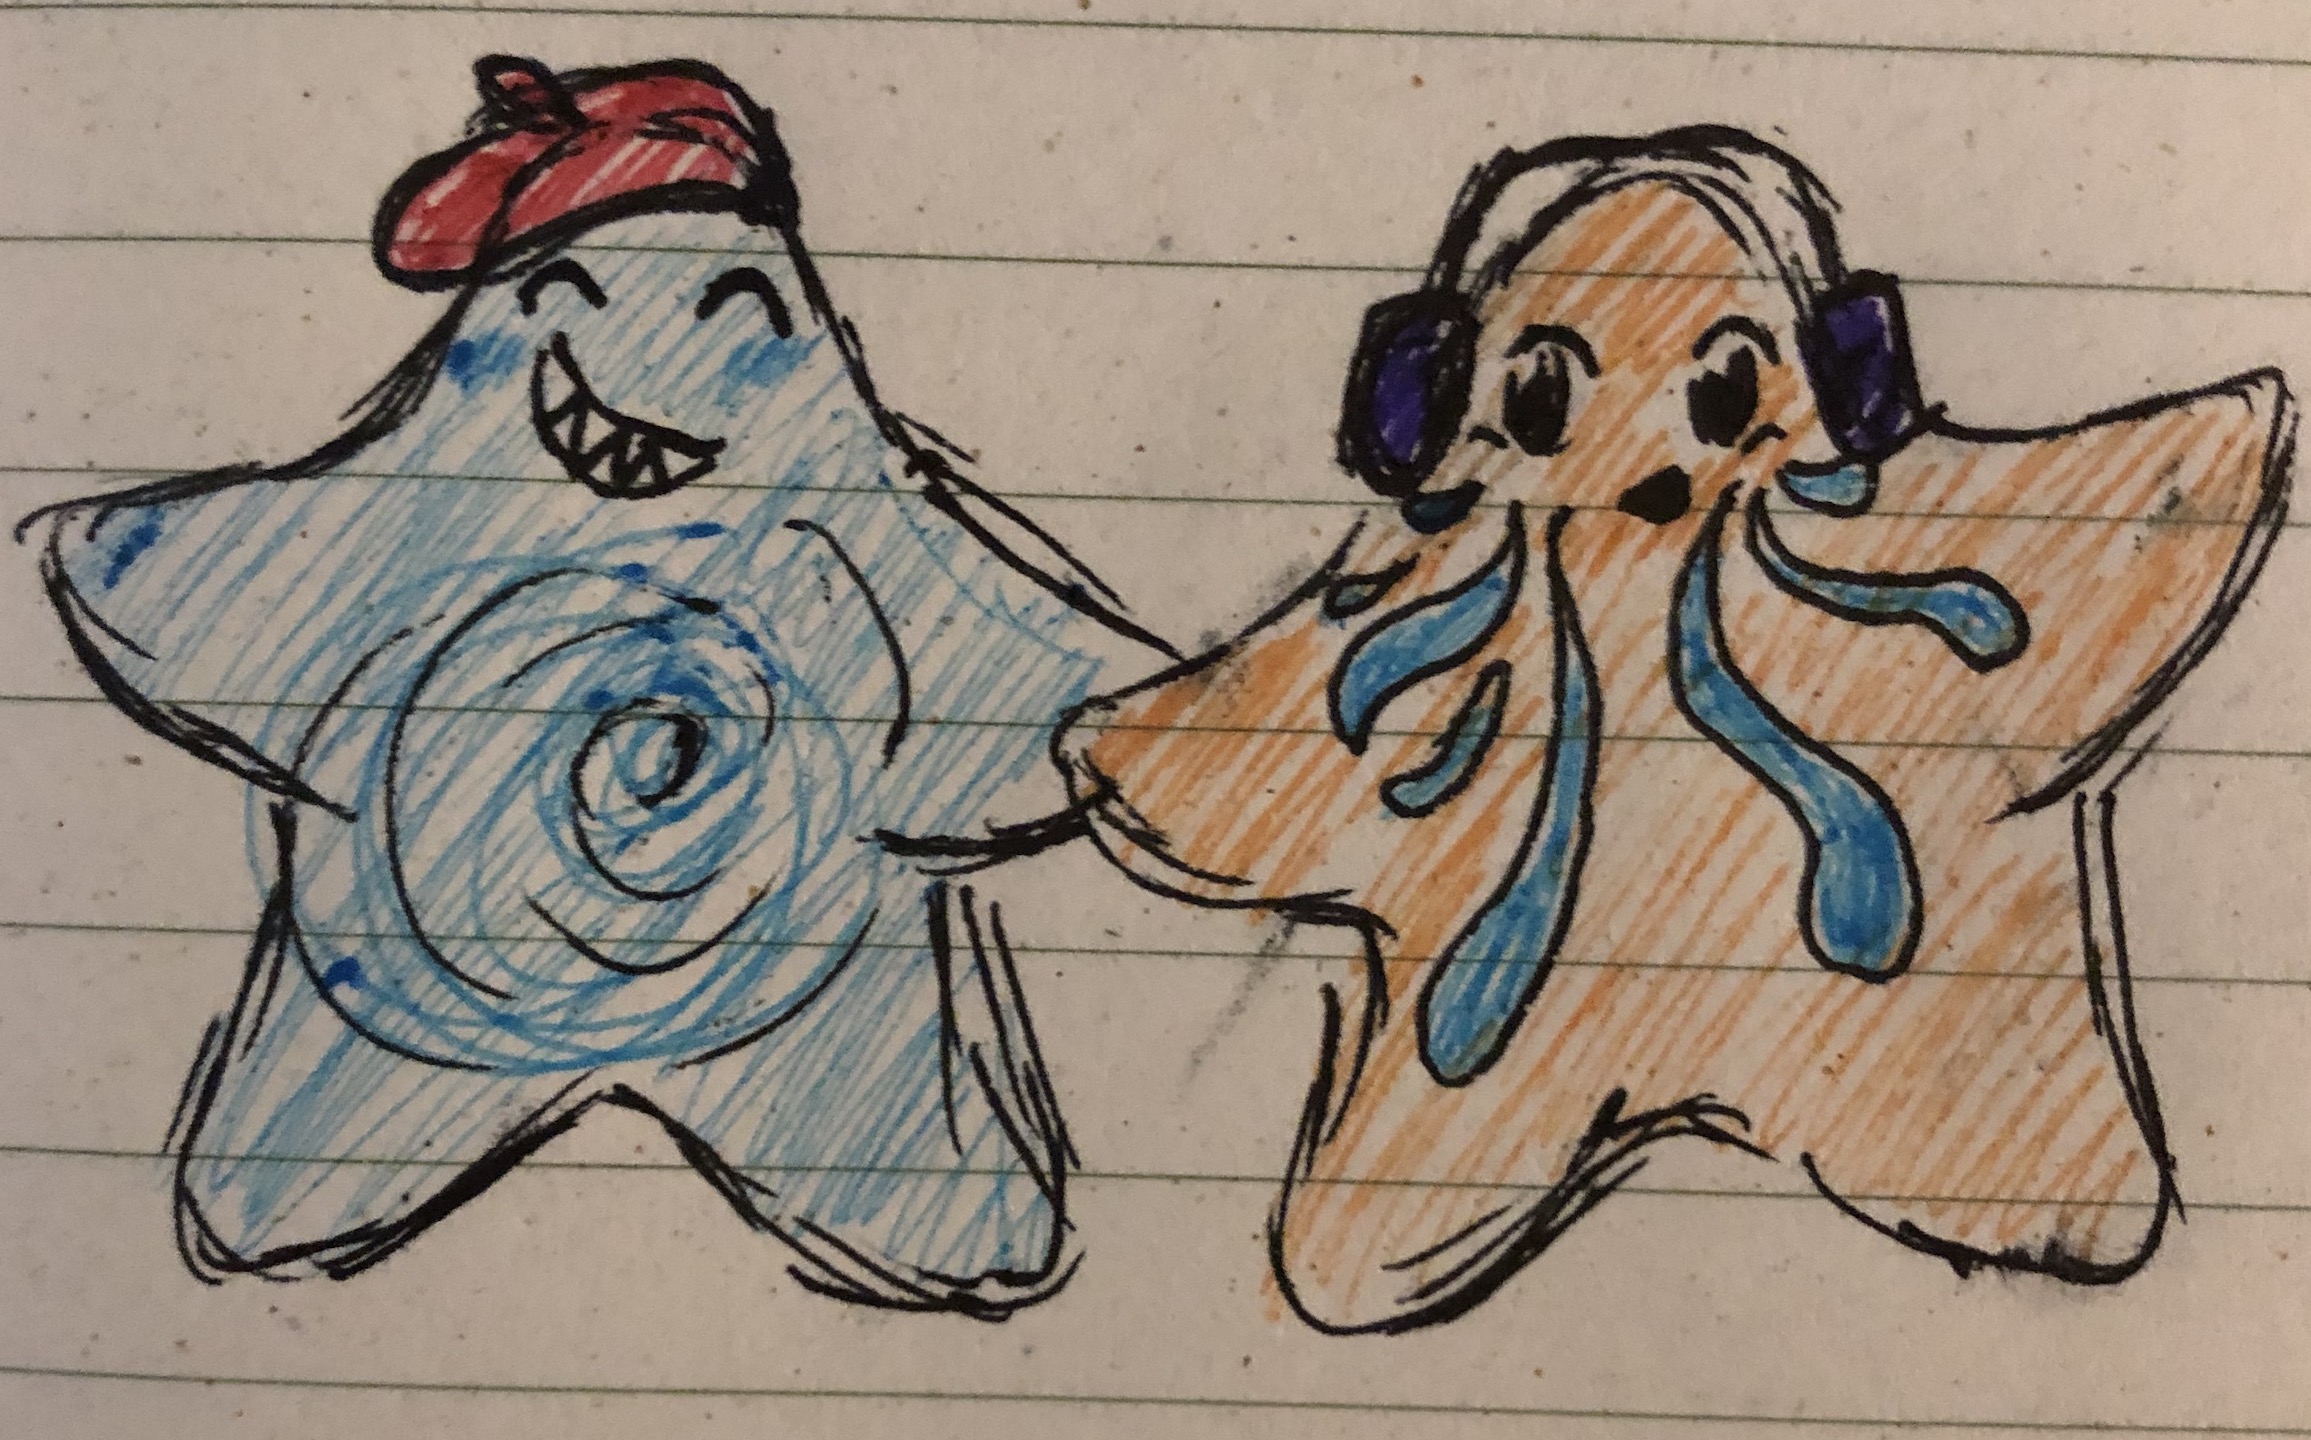 Hungry star wearing Sad Star’s beret and Sad star wearing hungry star’s headphones. They’re grinning at each other